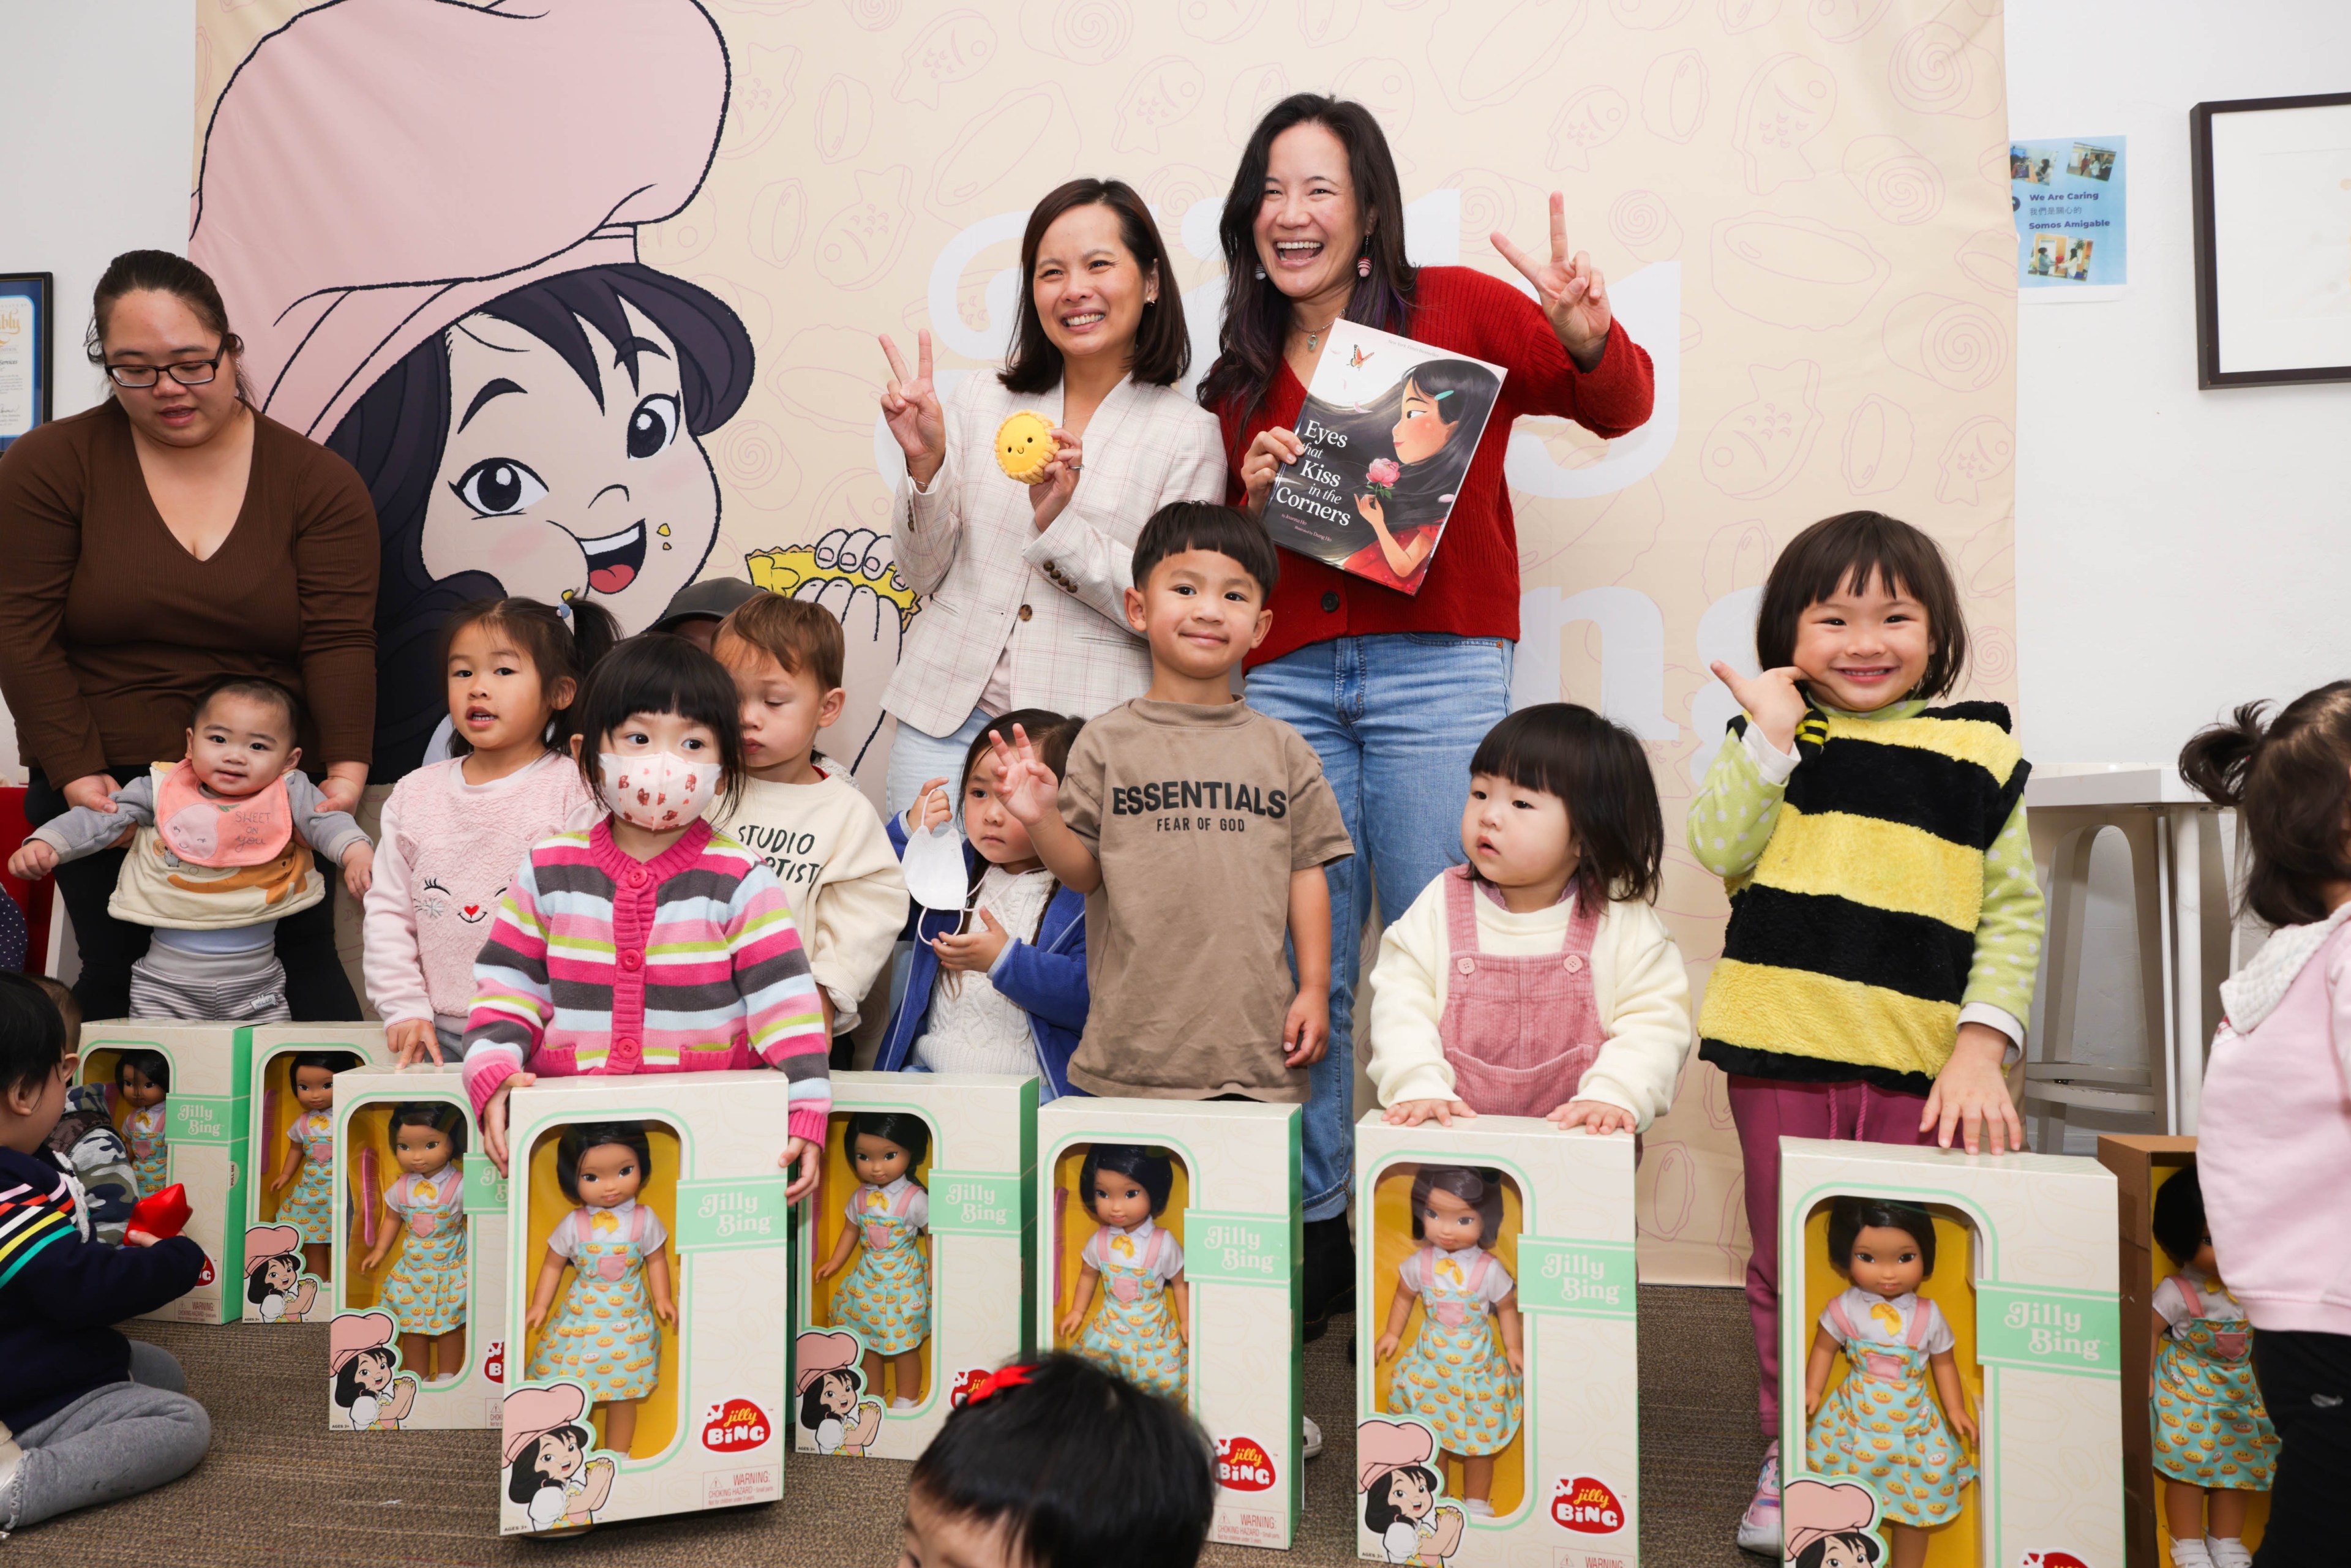 A group of kids and adults in the background pose with dolls in front of them. 